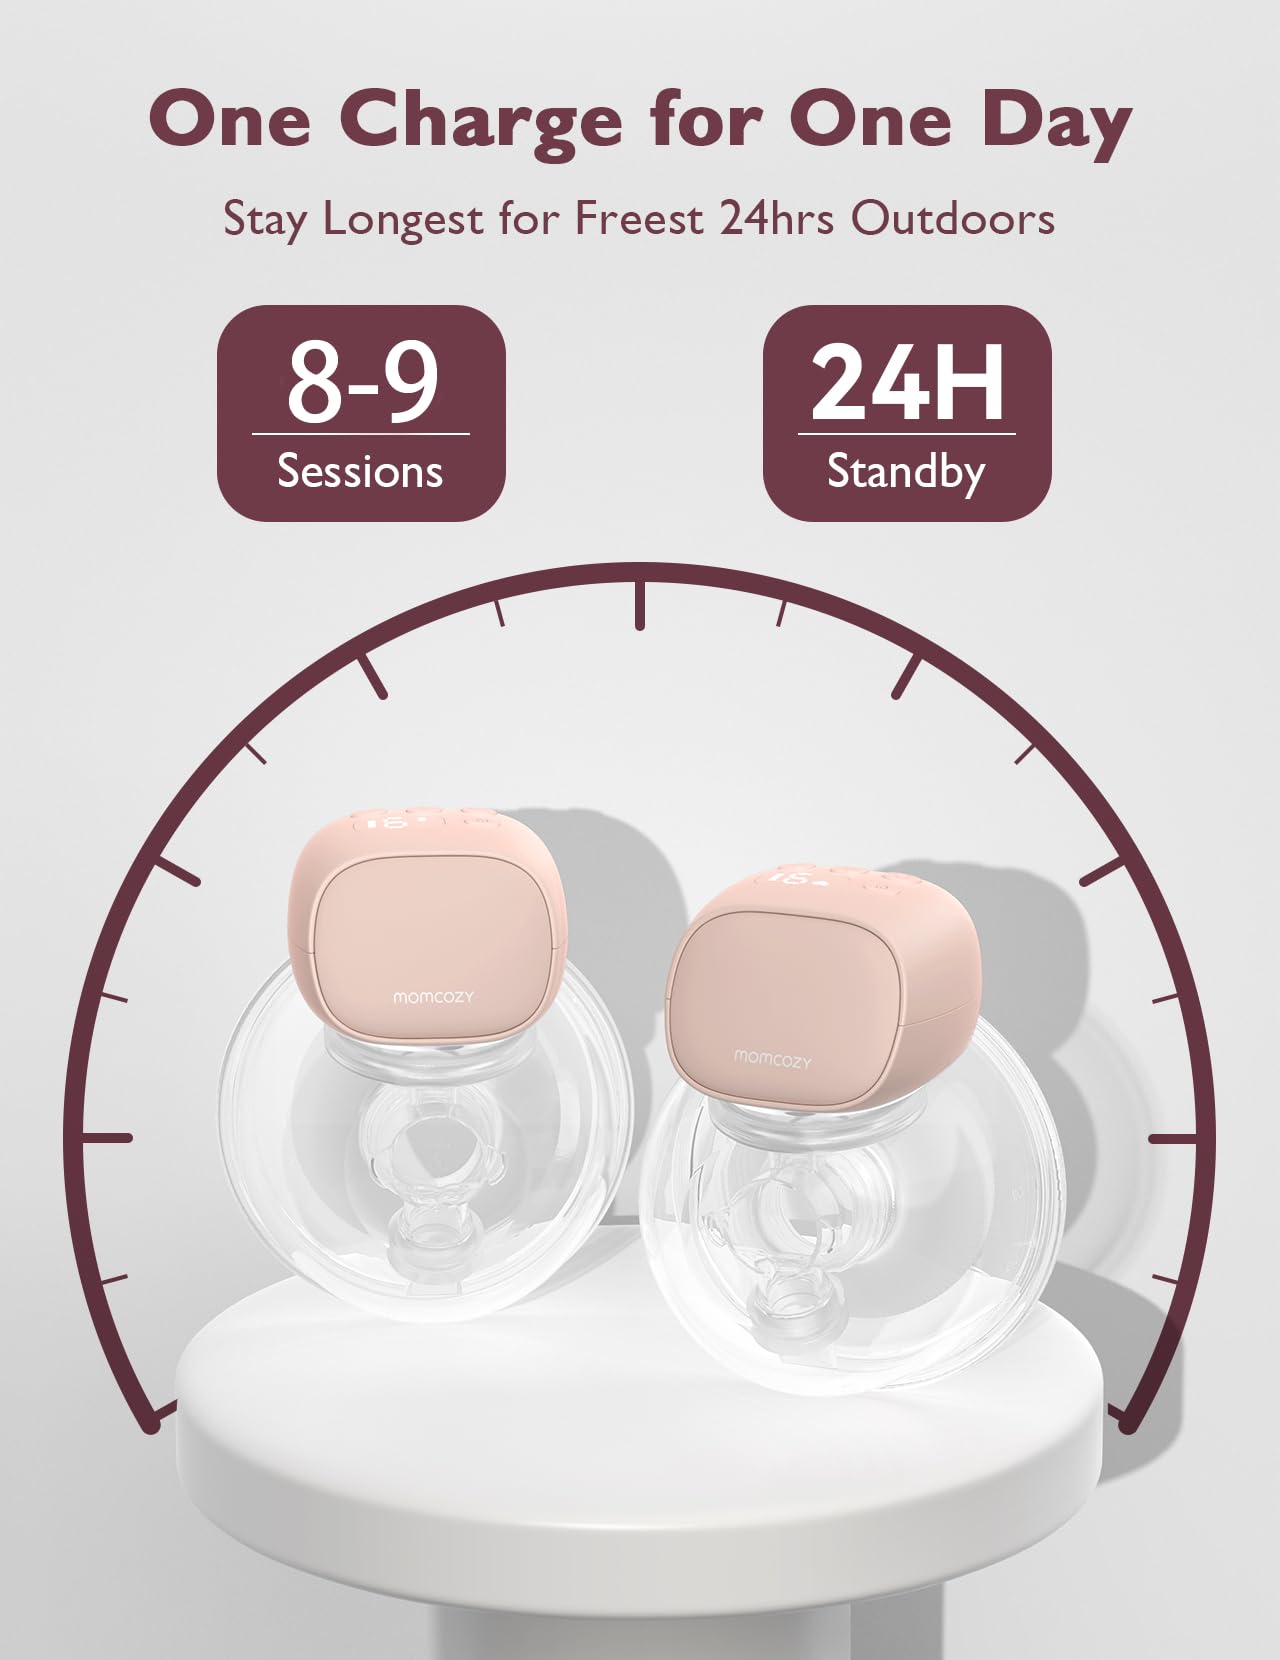 Momcozy Double Wearable Breast Pump S9 Pro, Hands Free Breast Pump Electric  24mm Gray